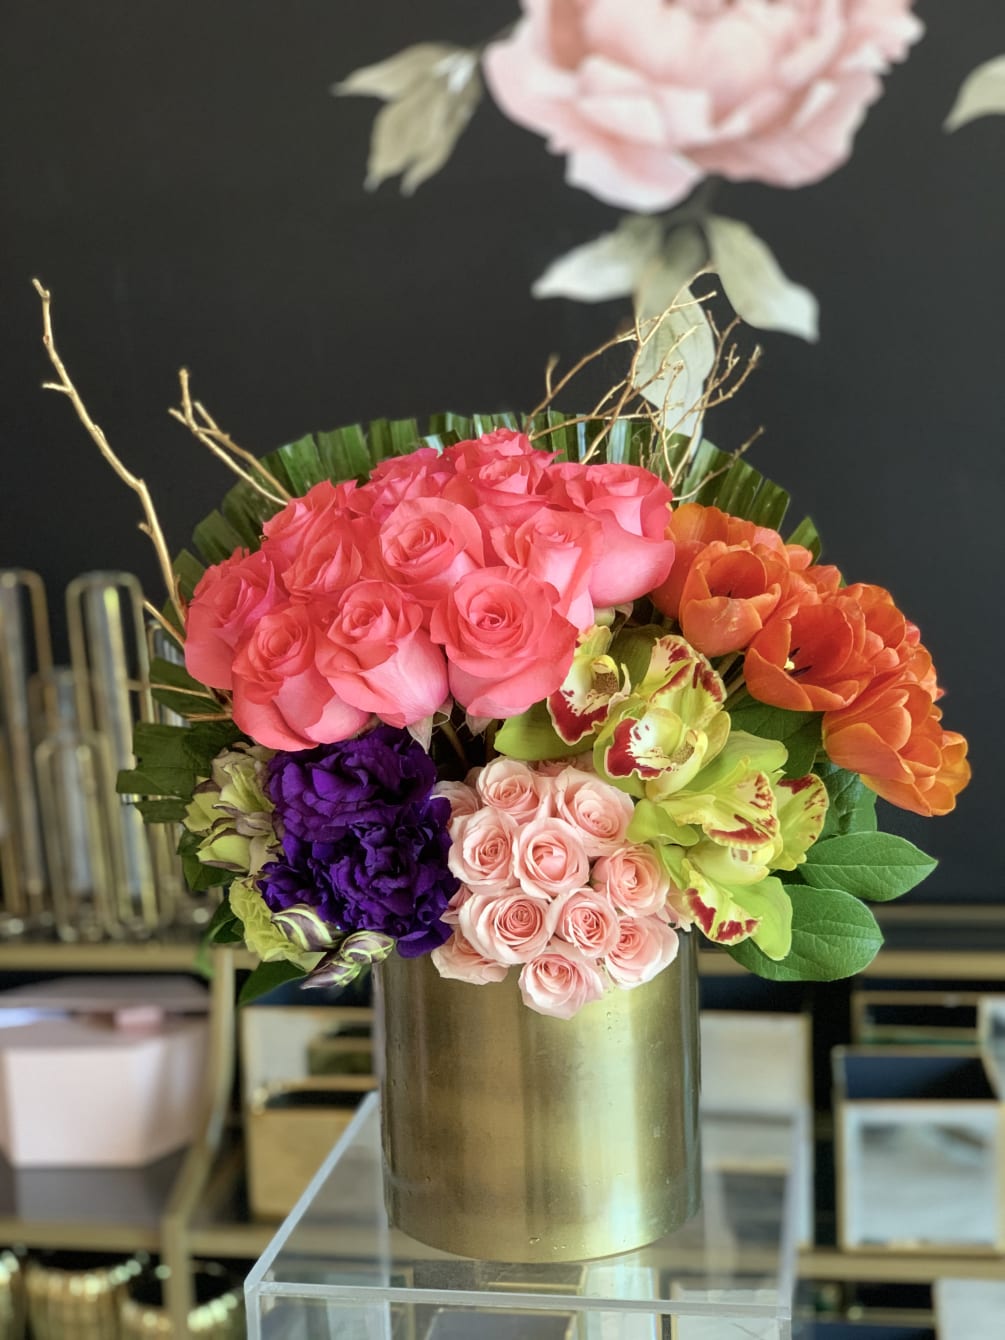 This vibrant arrangement is packed with lush florals in every color. All